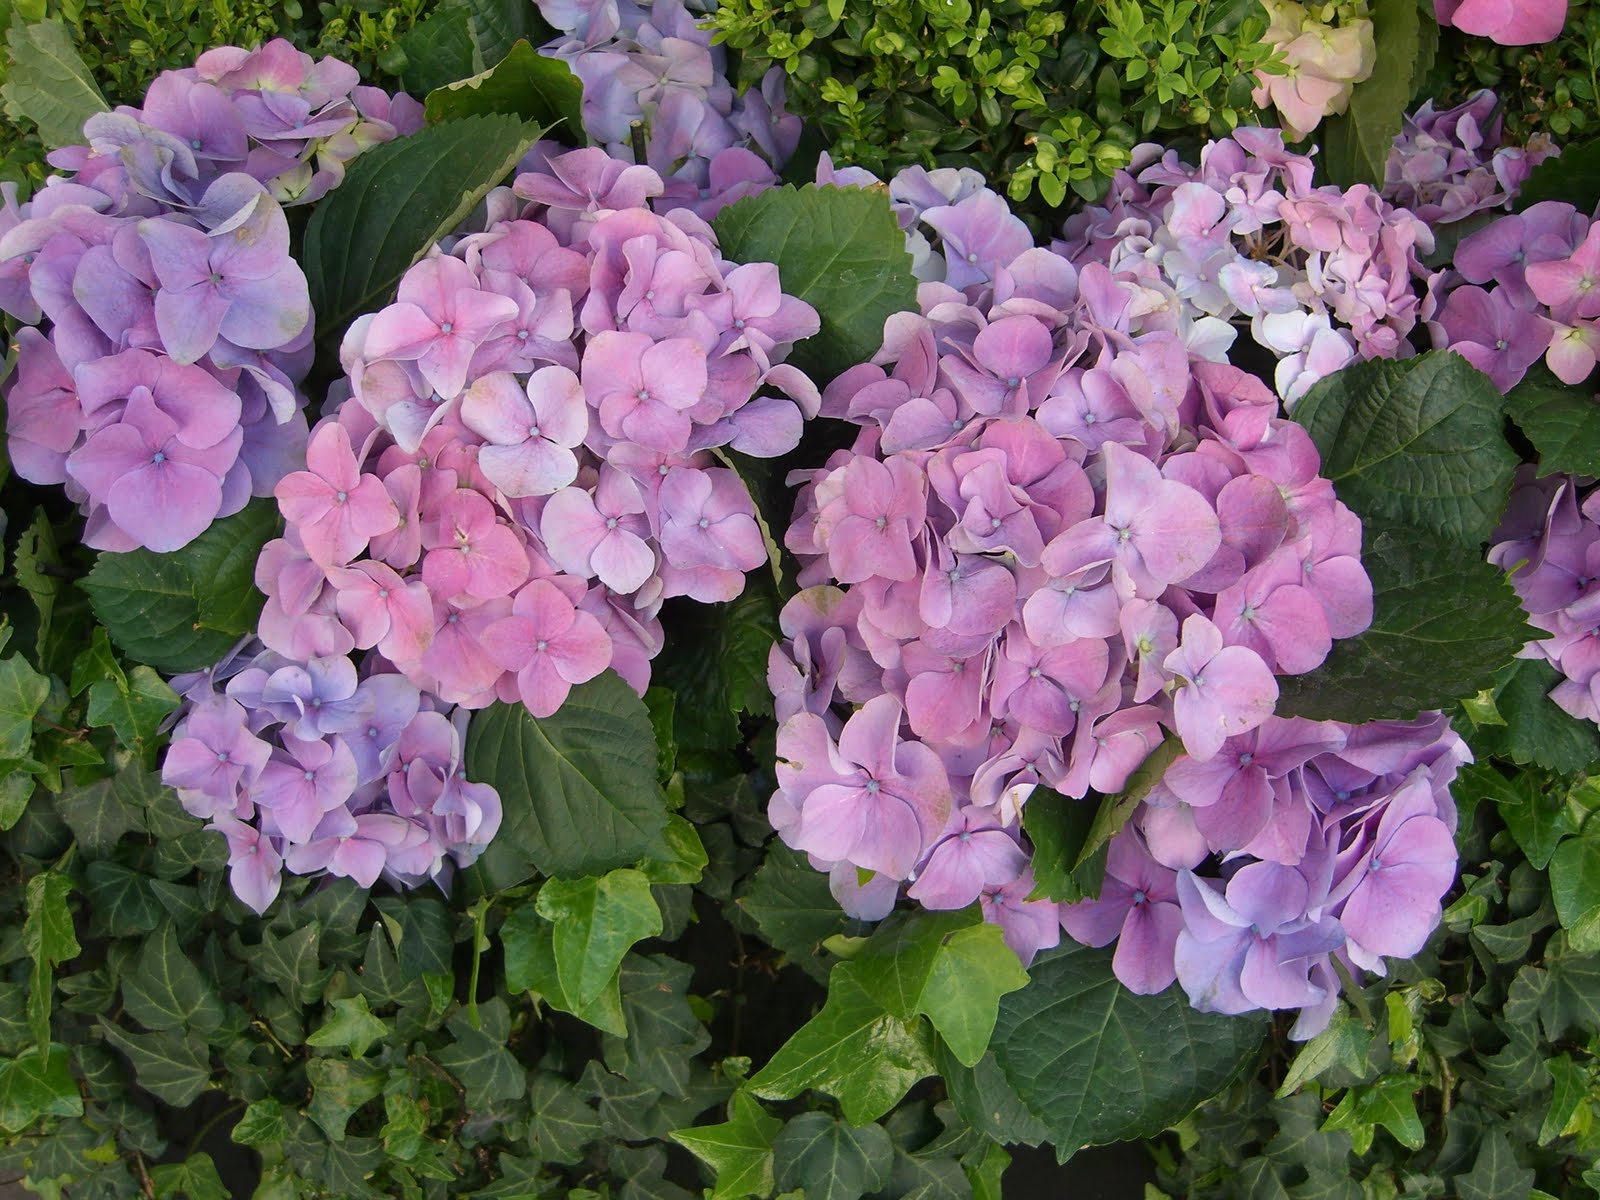 Hydrangea Has Lots Of Flower Buds But They Do Not Bloom